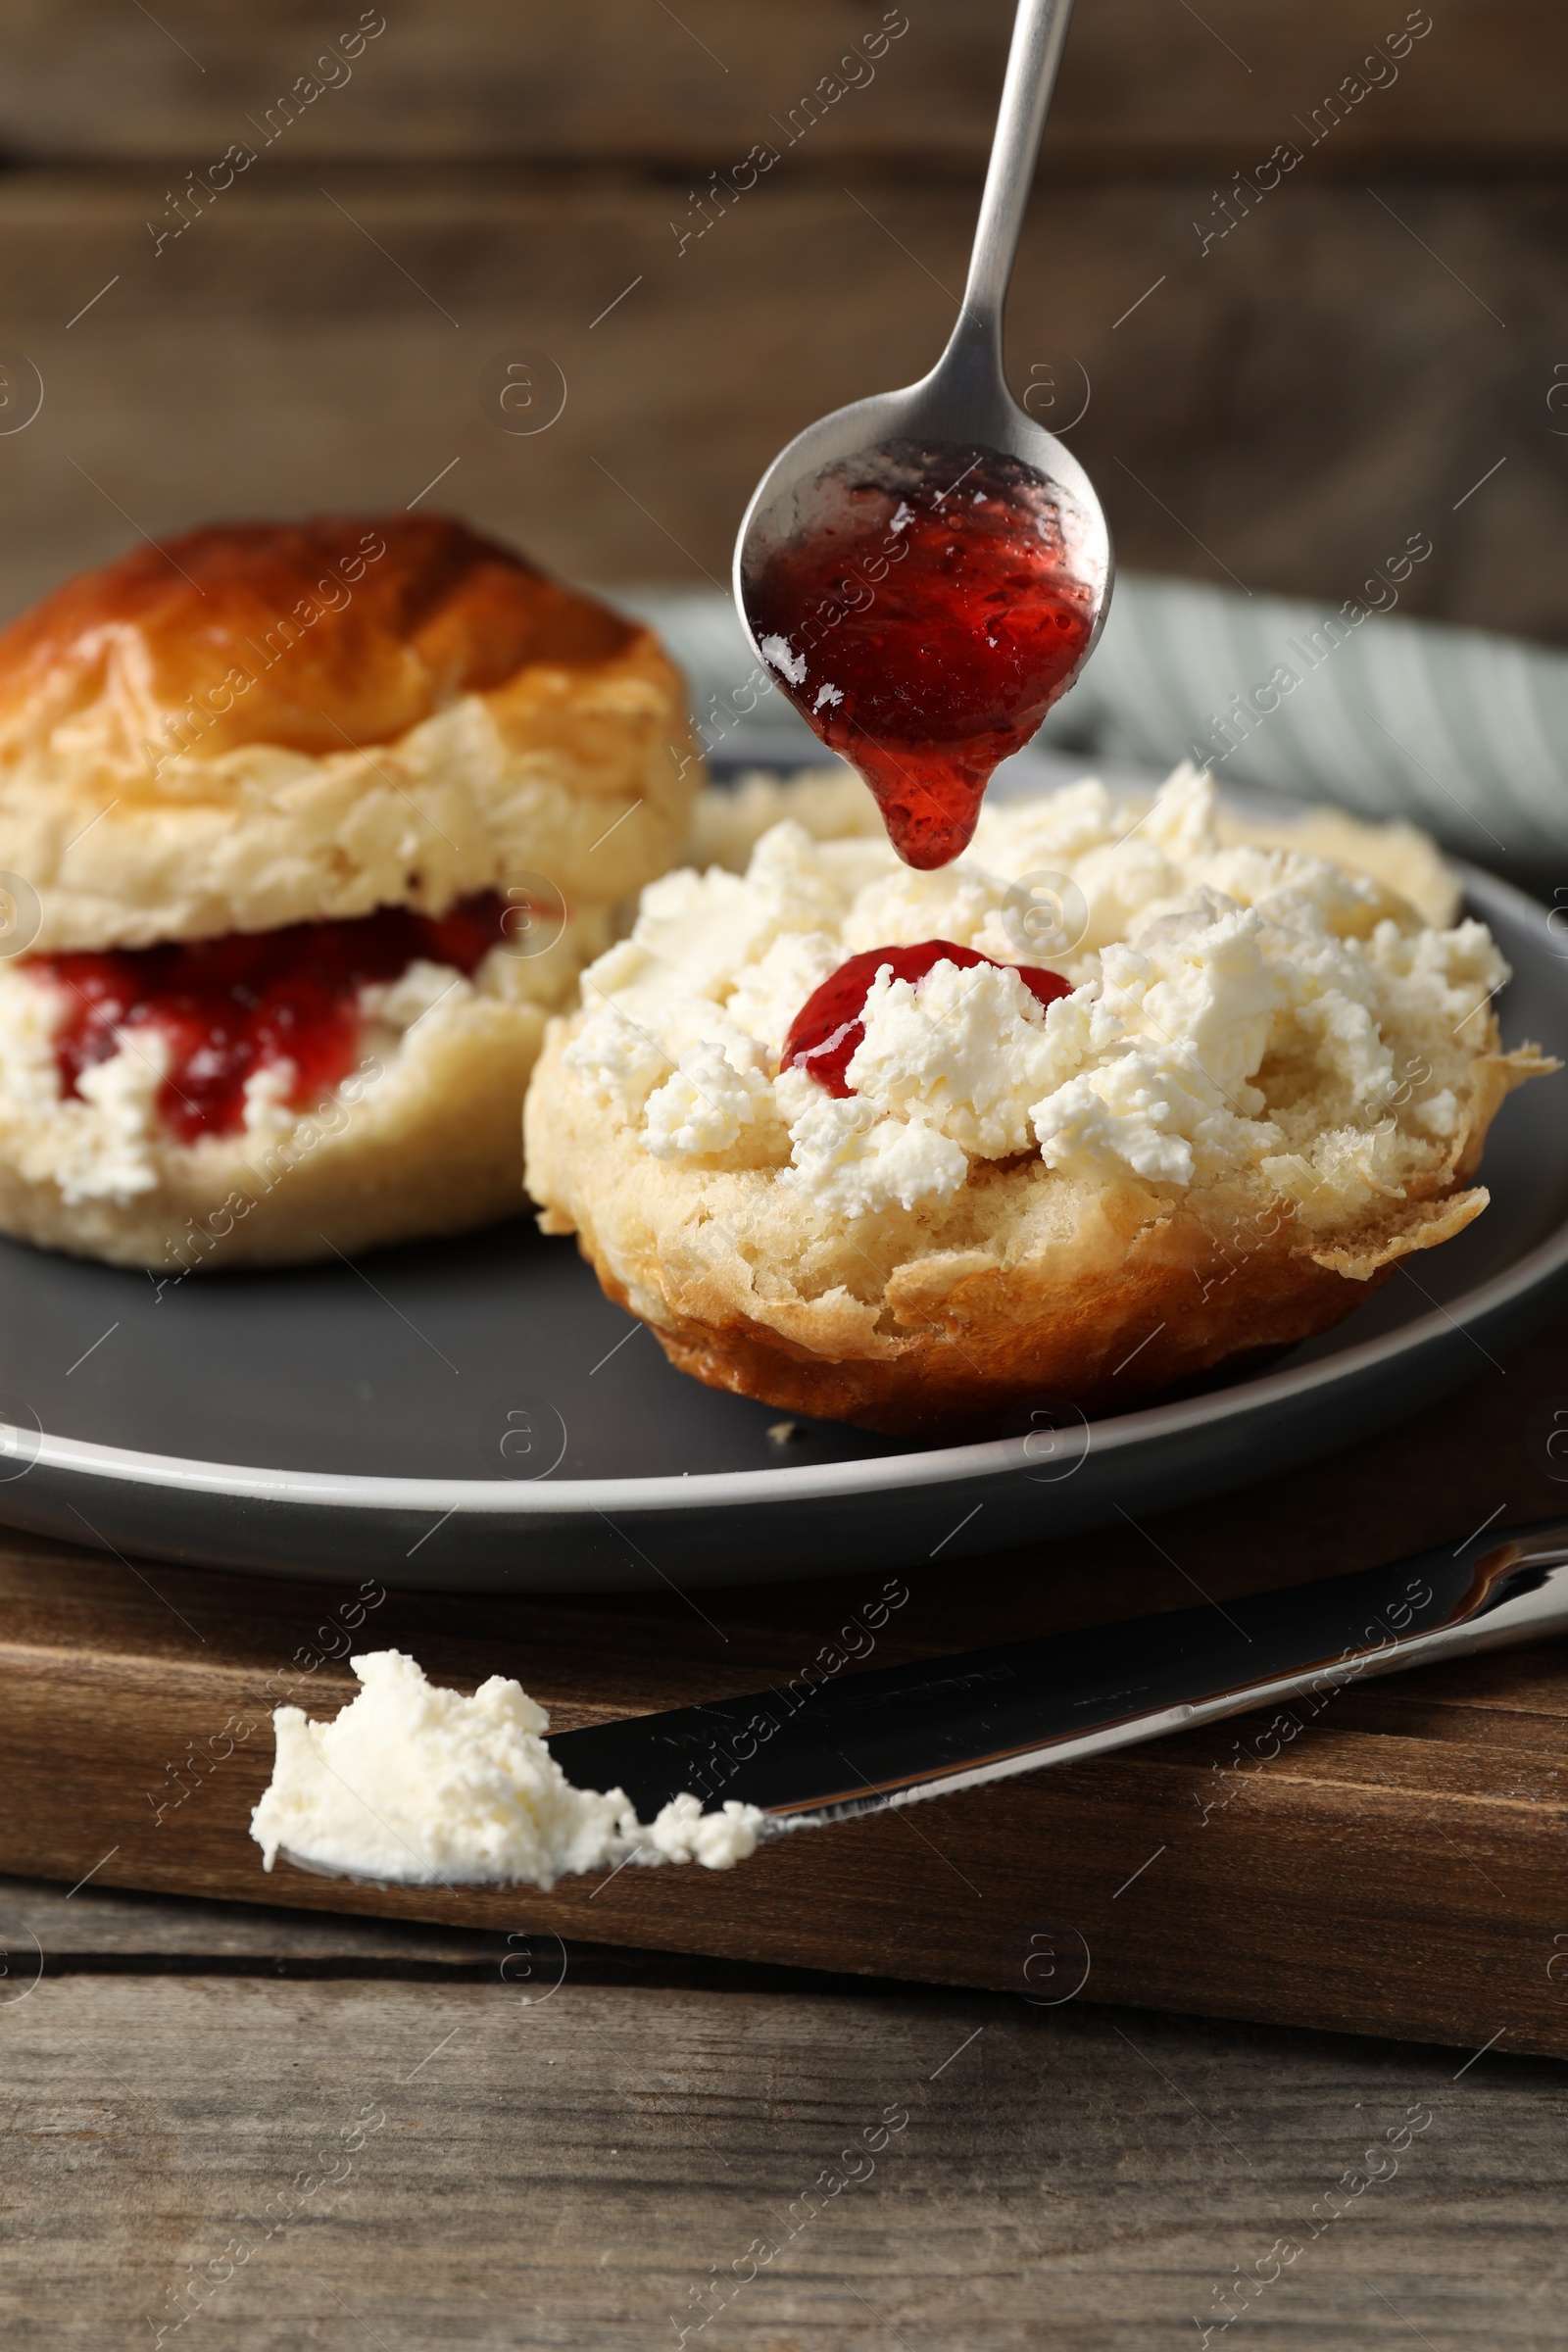 Photo of Pouring cranberry jam from spoon into freshly baked soda water scone on wooden table